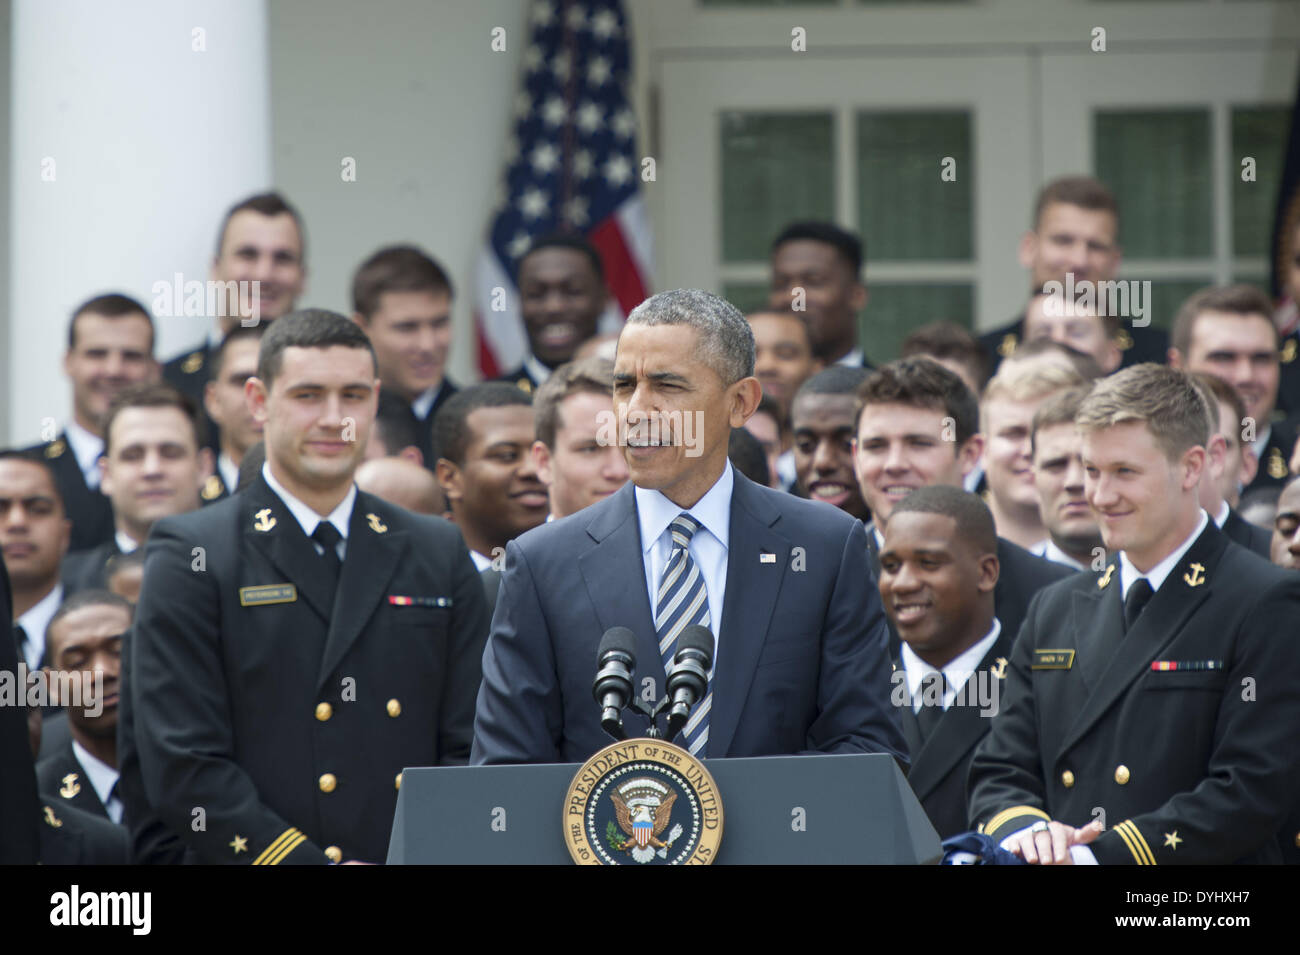 Washington, District Of Columbia, USA. 18th Apr, 2014. PRESIDENT OBAMA welcomes the Naval Academy Midshipmen Football Team to the White House to present them with the 2013 Commander-in-Chief Bowl. The ceremony was held in the Rose Garden of the White House Credit:  Ricky Fitchett/ZUMAPRESS.com/Alamy Live News Stock Photo